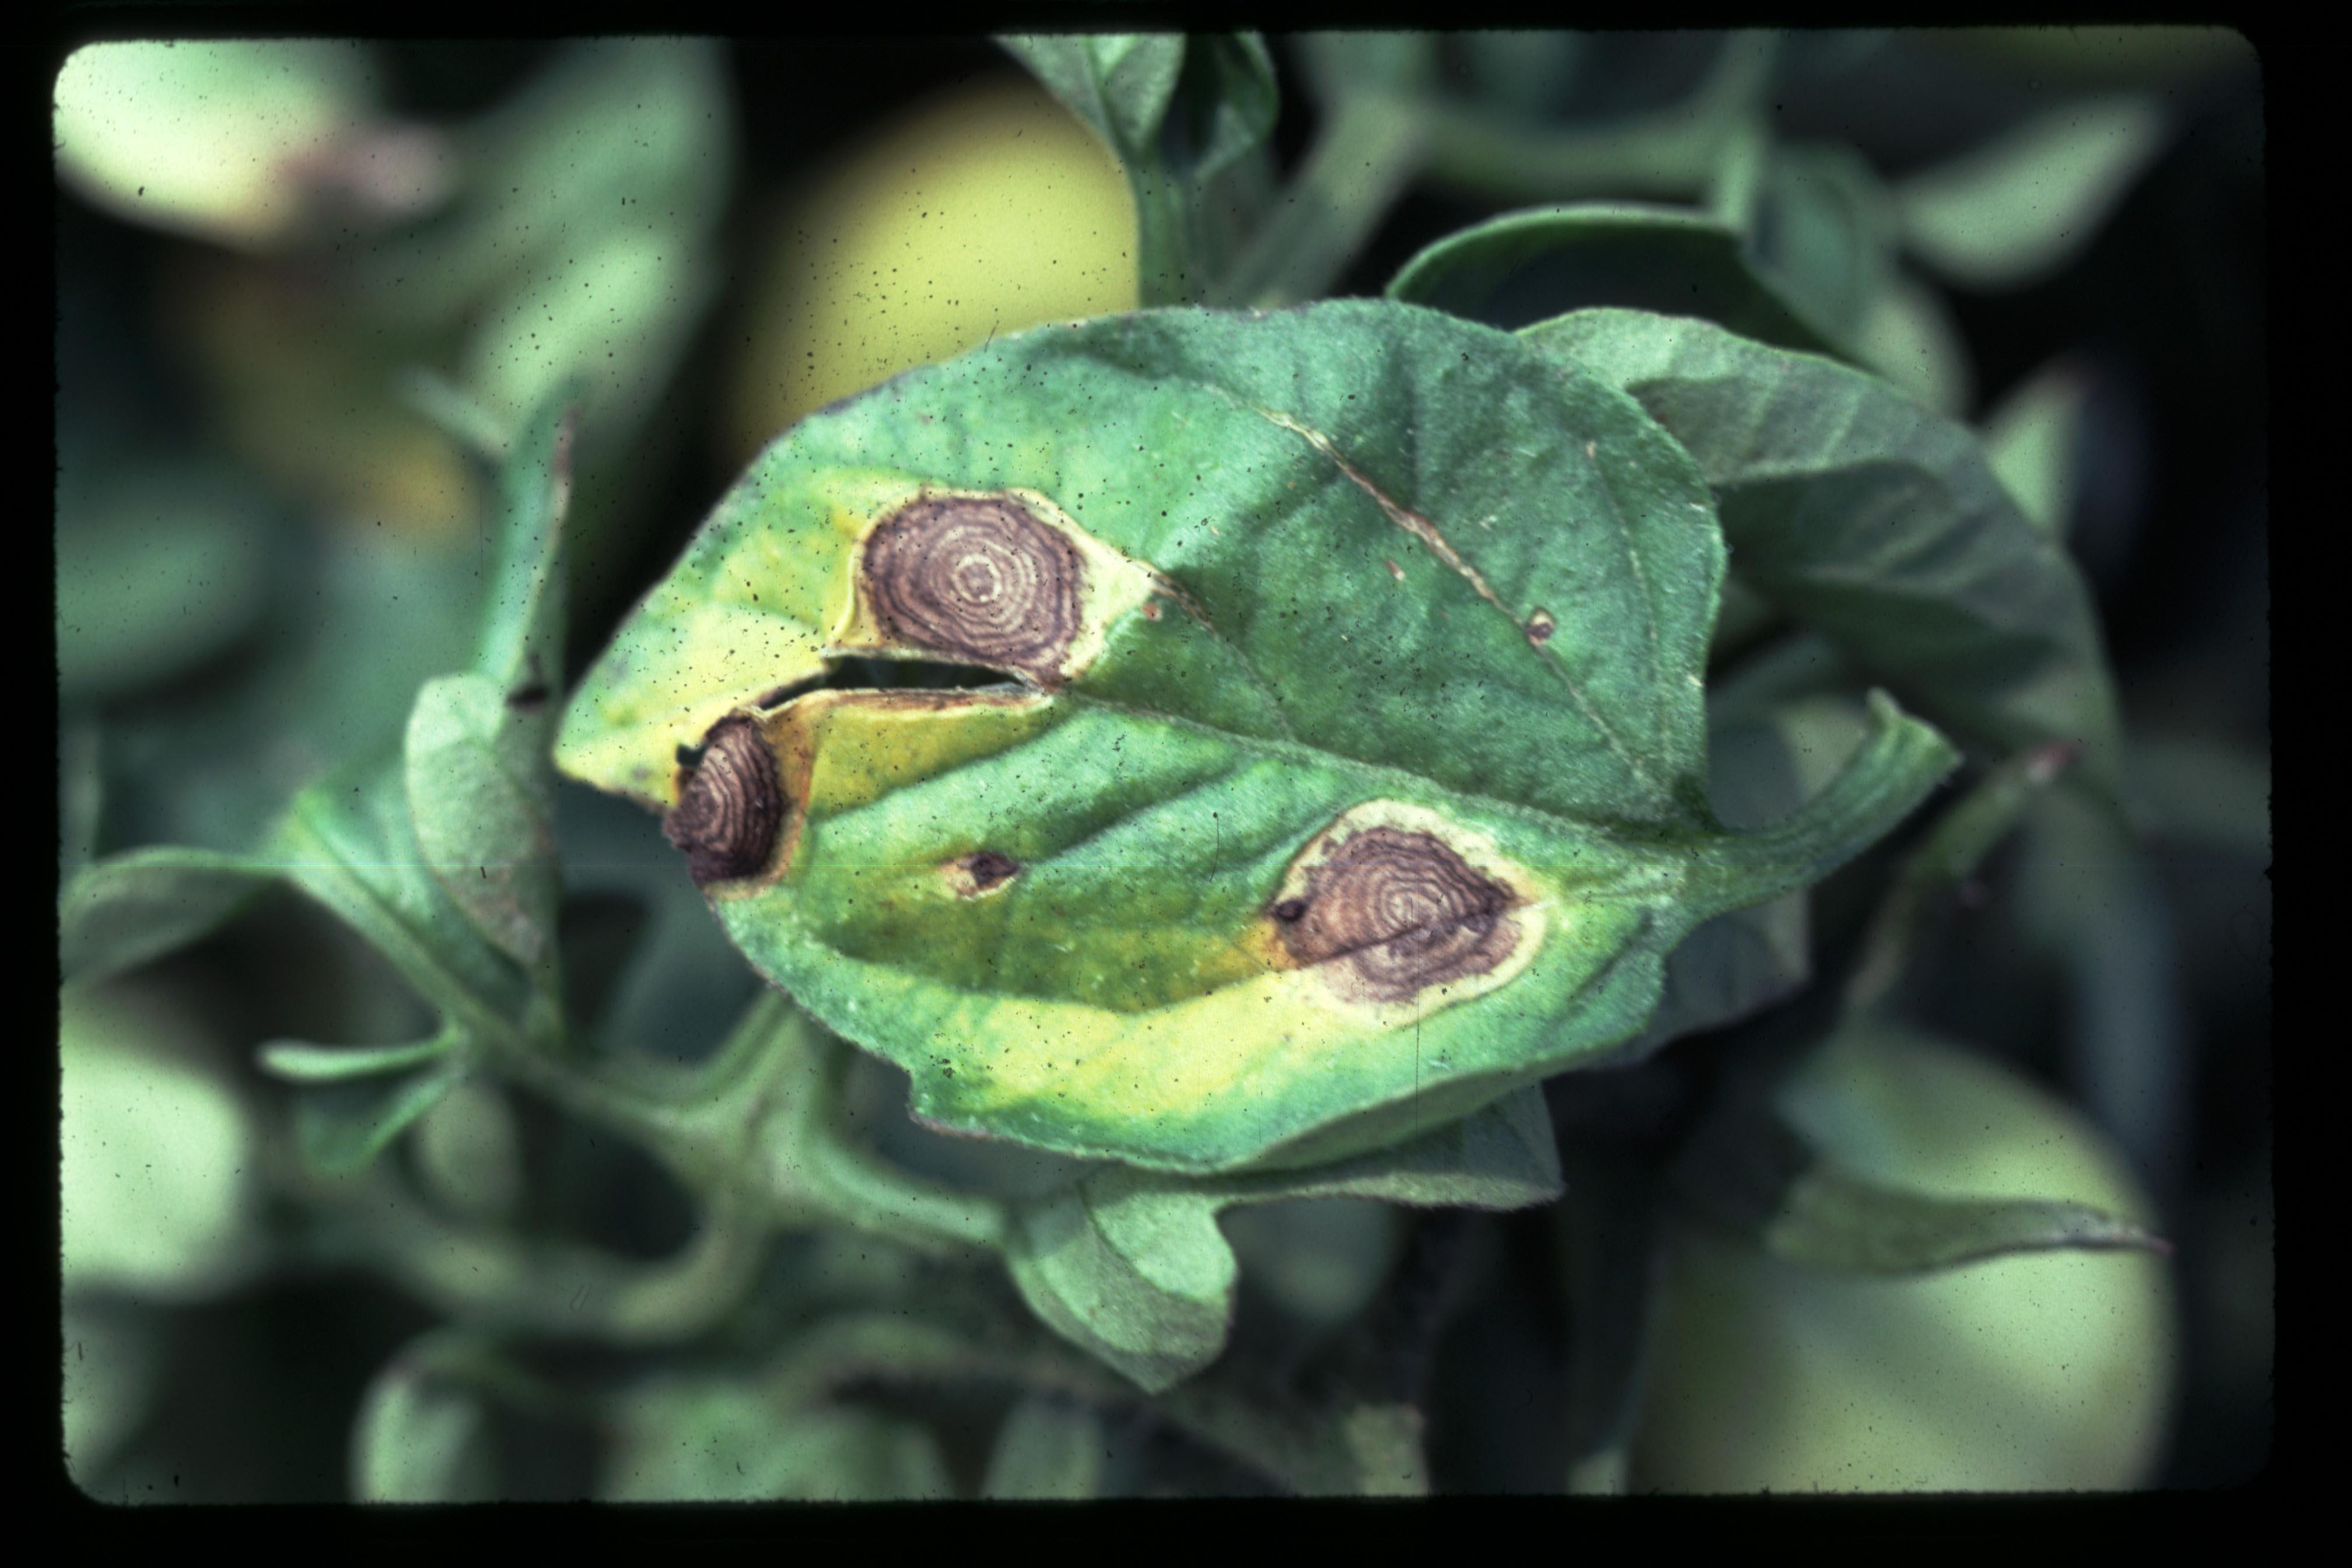 Early blight lesions on tomato foliage